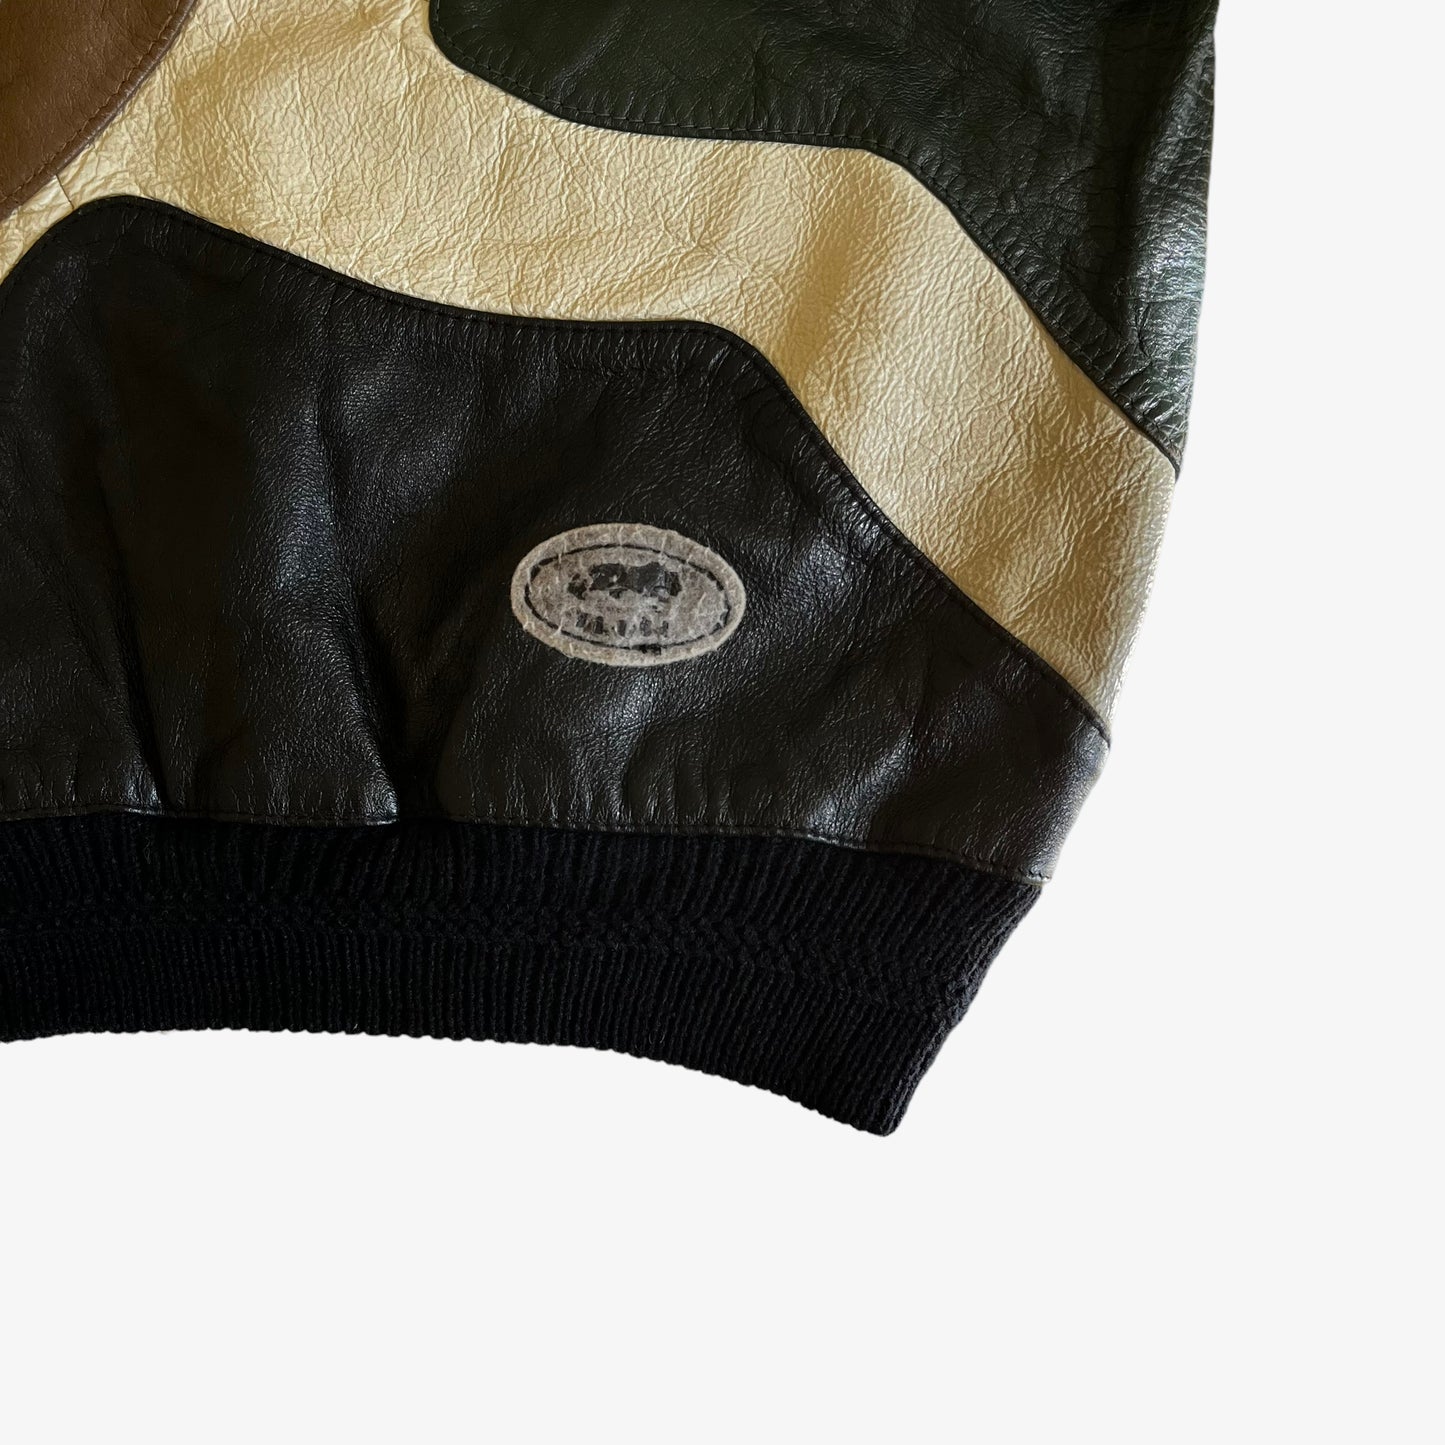 Vintage 90s Trutus Biancarra By Monobaik Leather Patch Knitted Jumper Logo - Casspios Dream